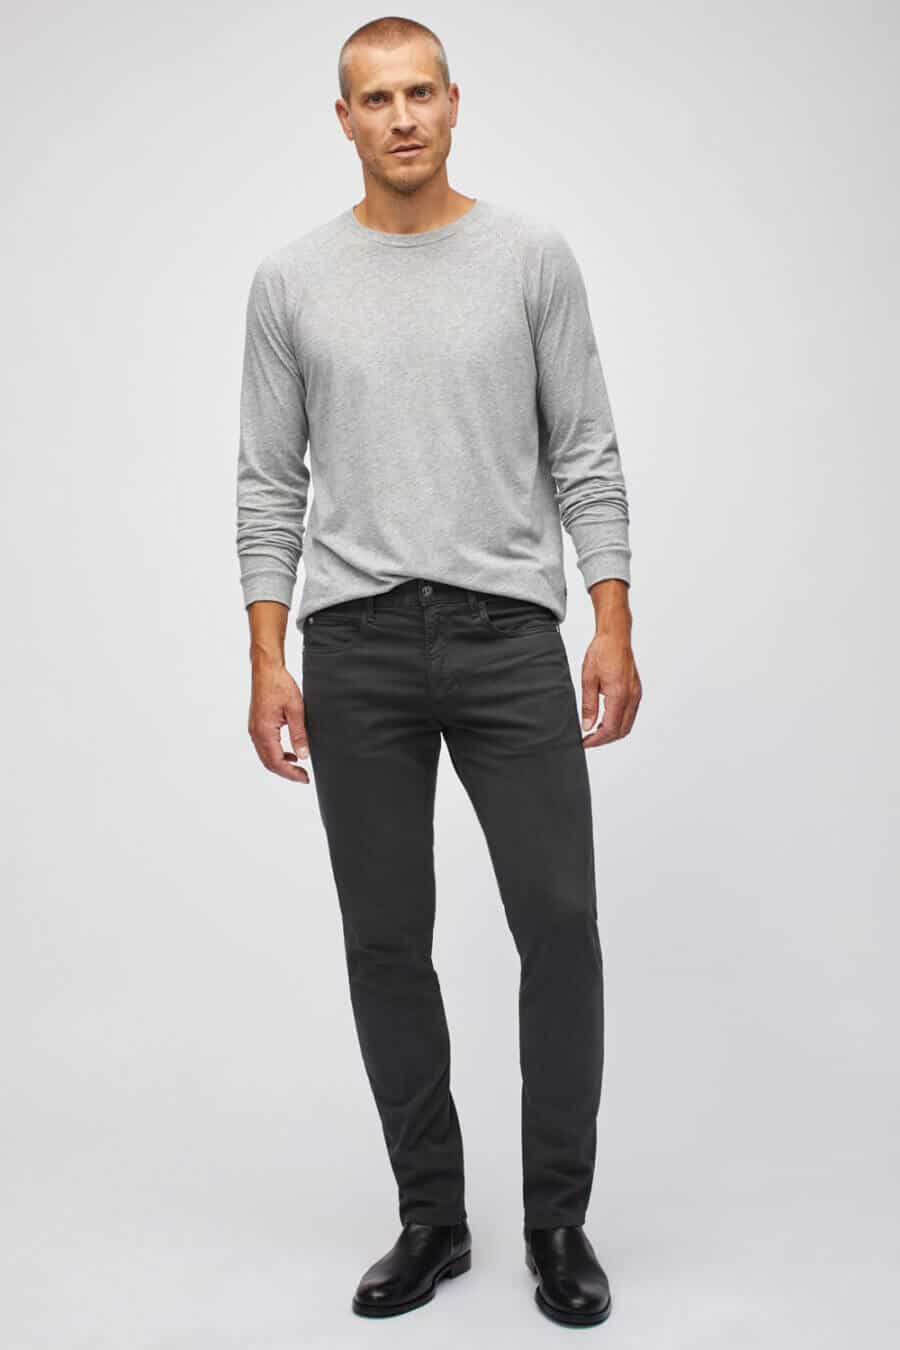 Men's black jeans and boots with grey long sleeve top outfit